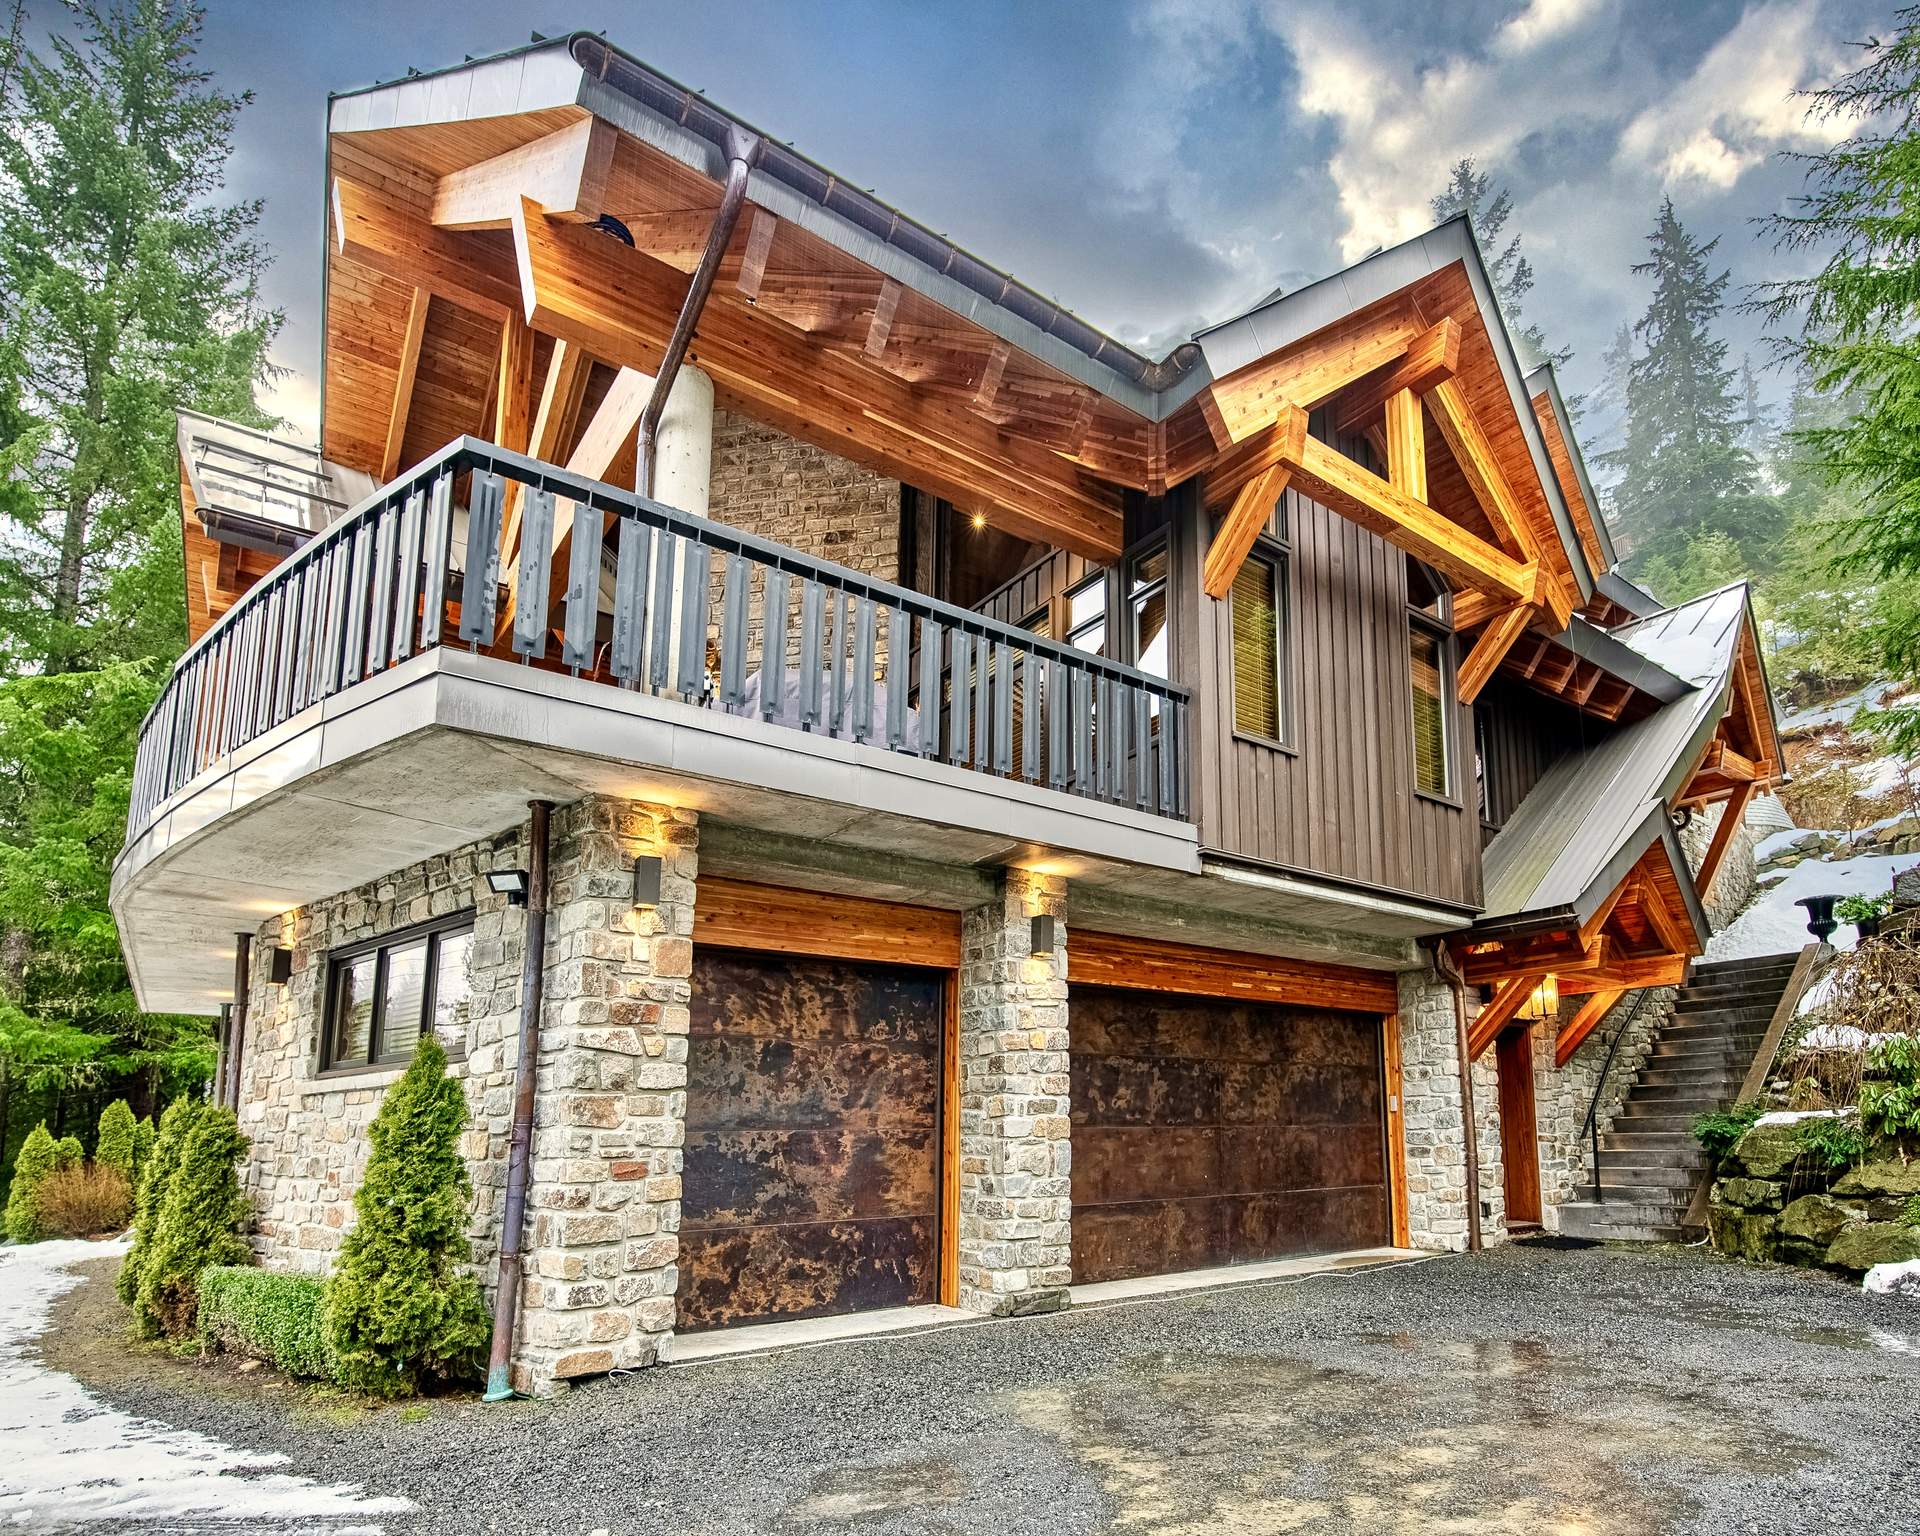 A World-Class Whistler Resort Residence with a touch of Tuscany!